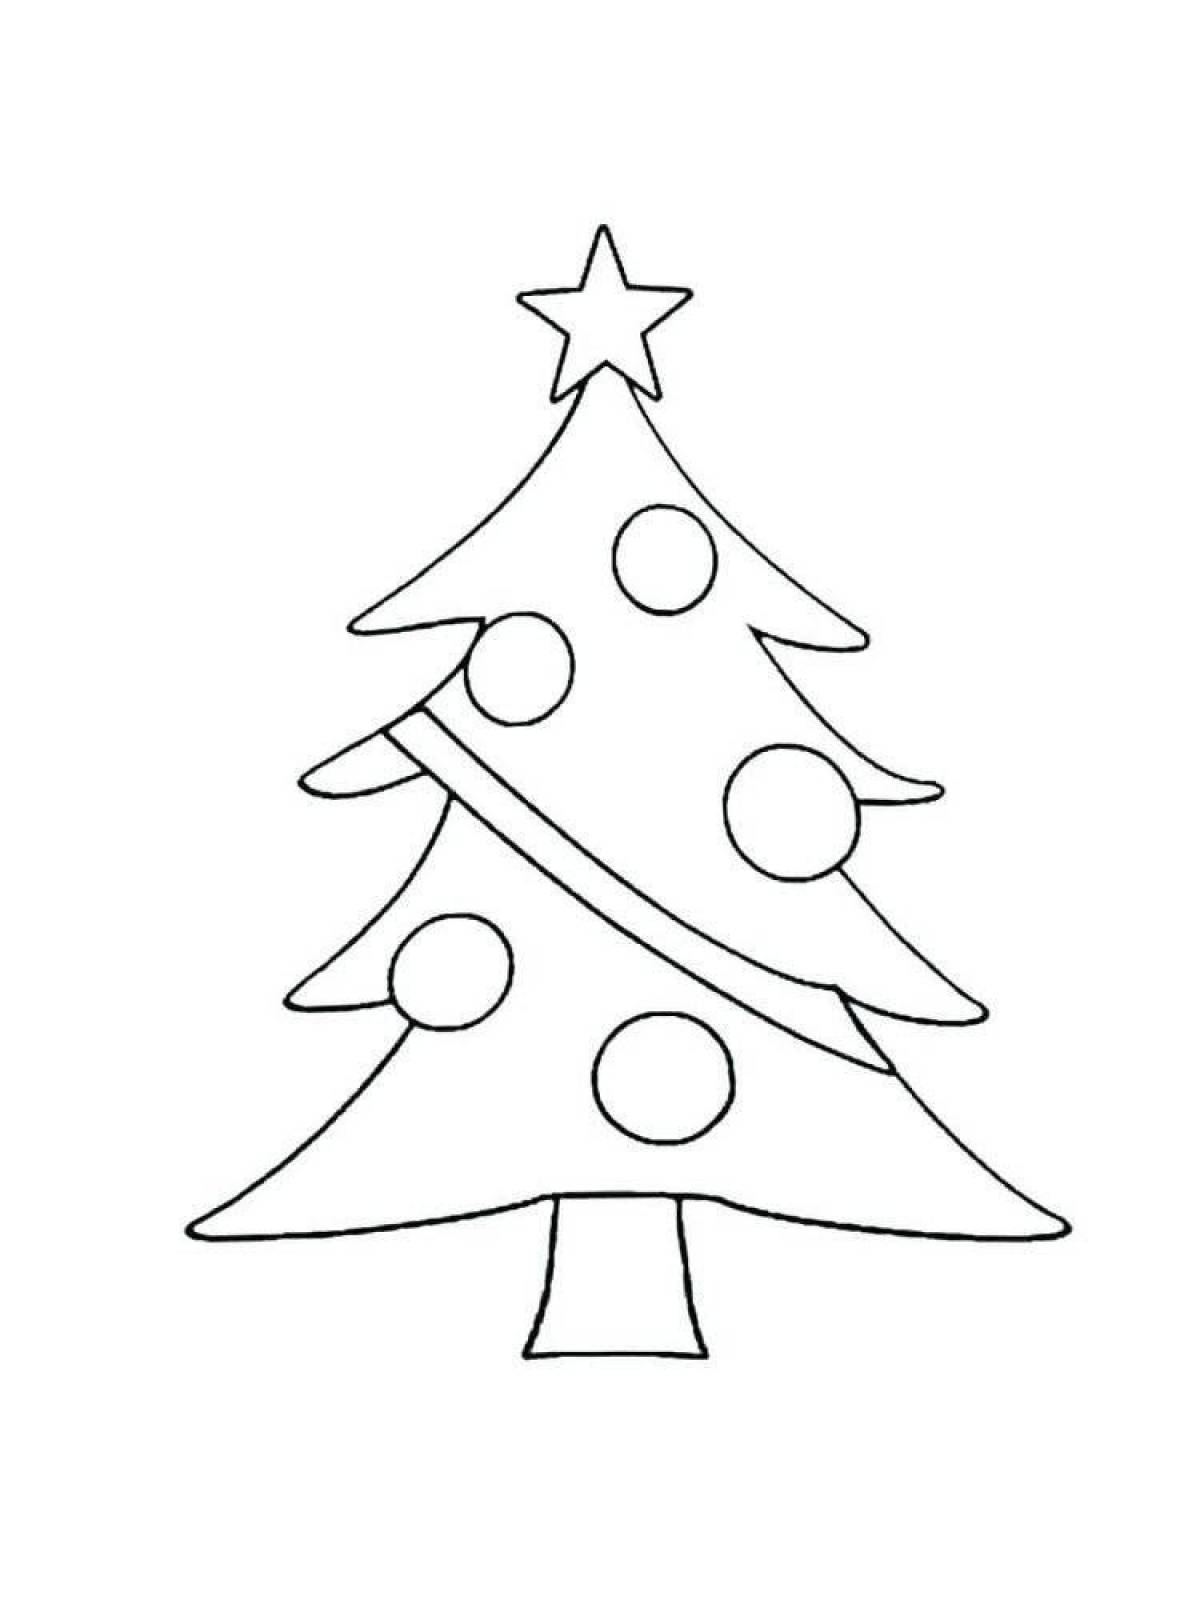 Amazing Christmas tree coloring book for 3-4 year olds